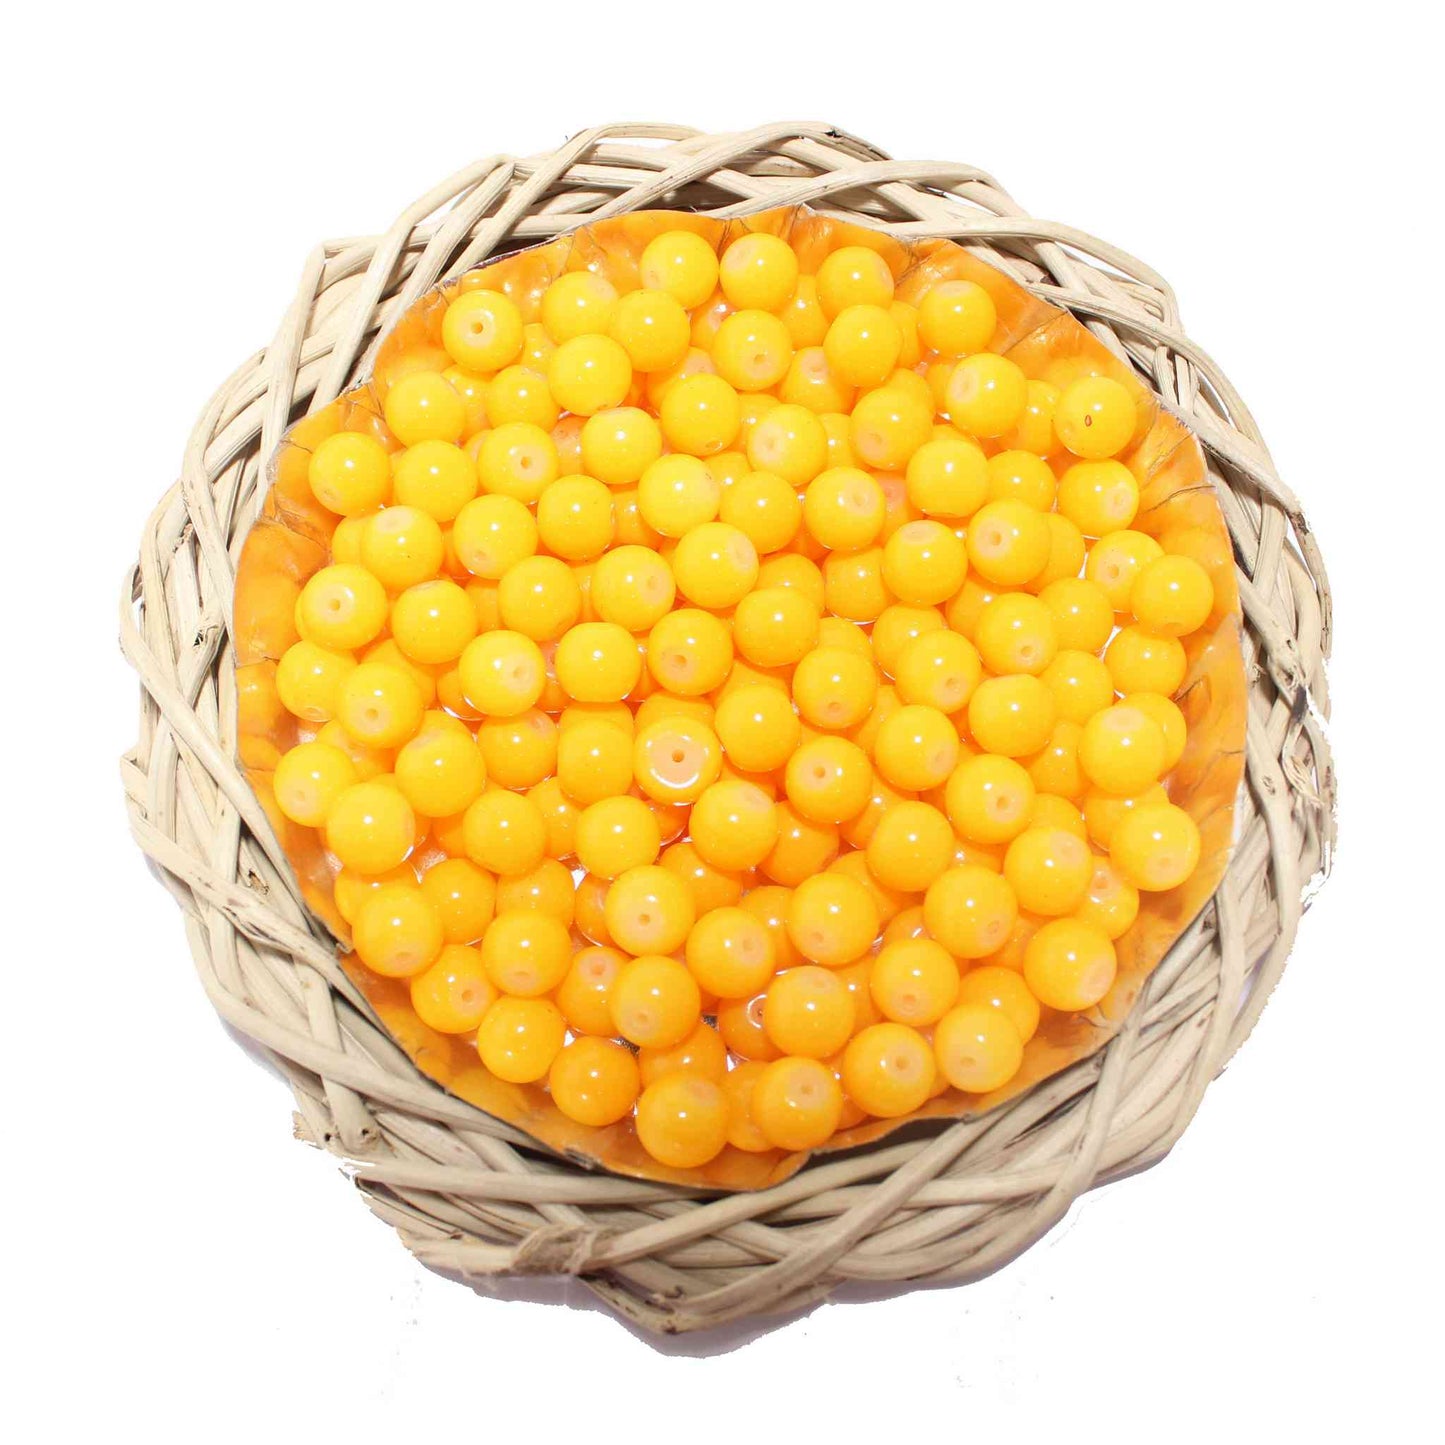 Premium quality Round shape Glass Beads for DIY Craft, Trousseau Packing or Decoration - Design 725, 10mm, Yellow - Indian Petals